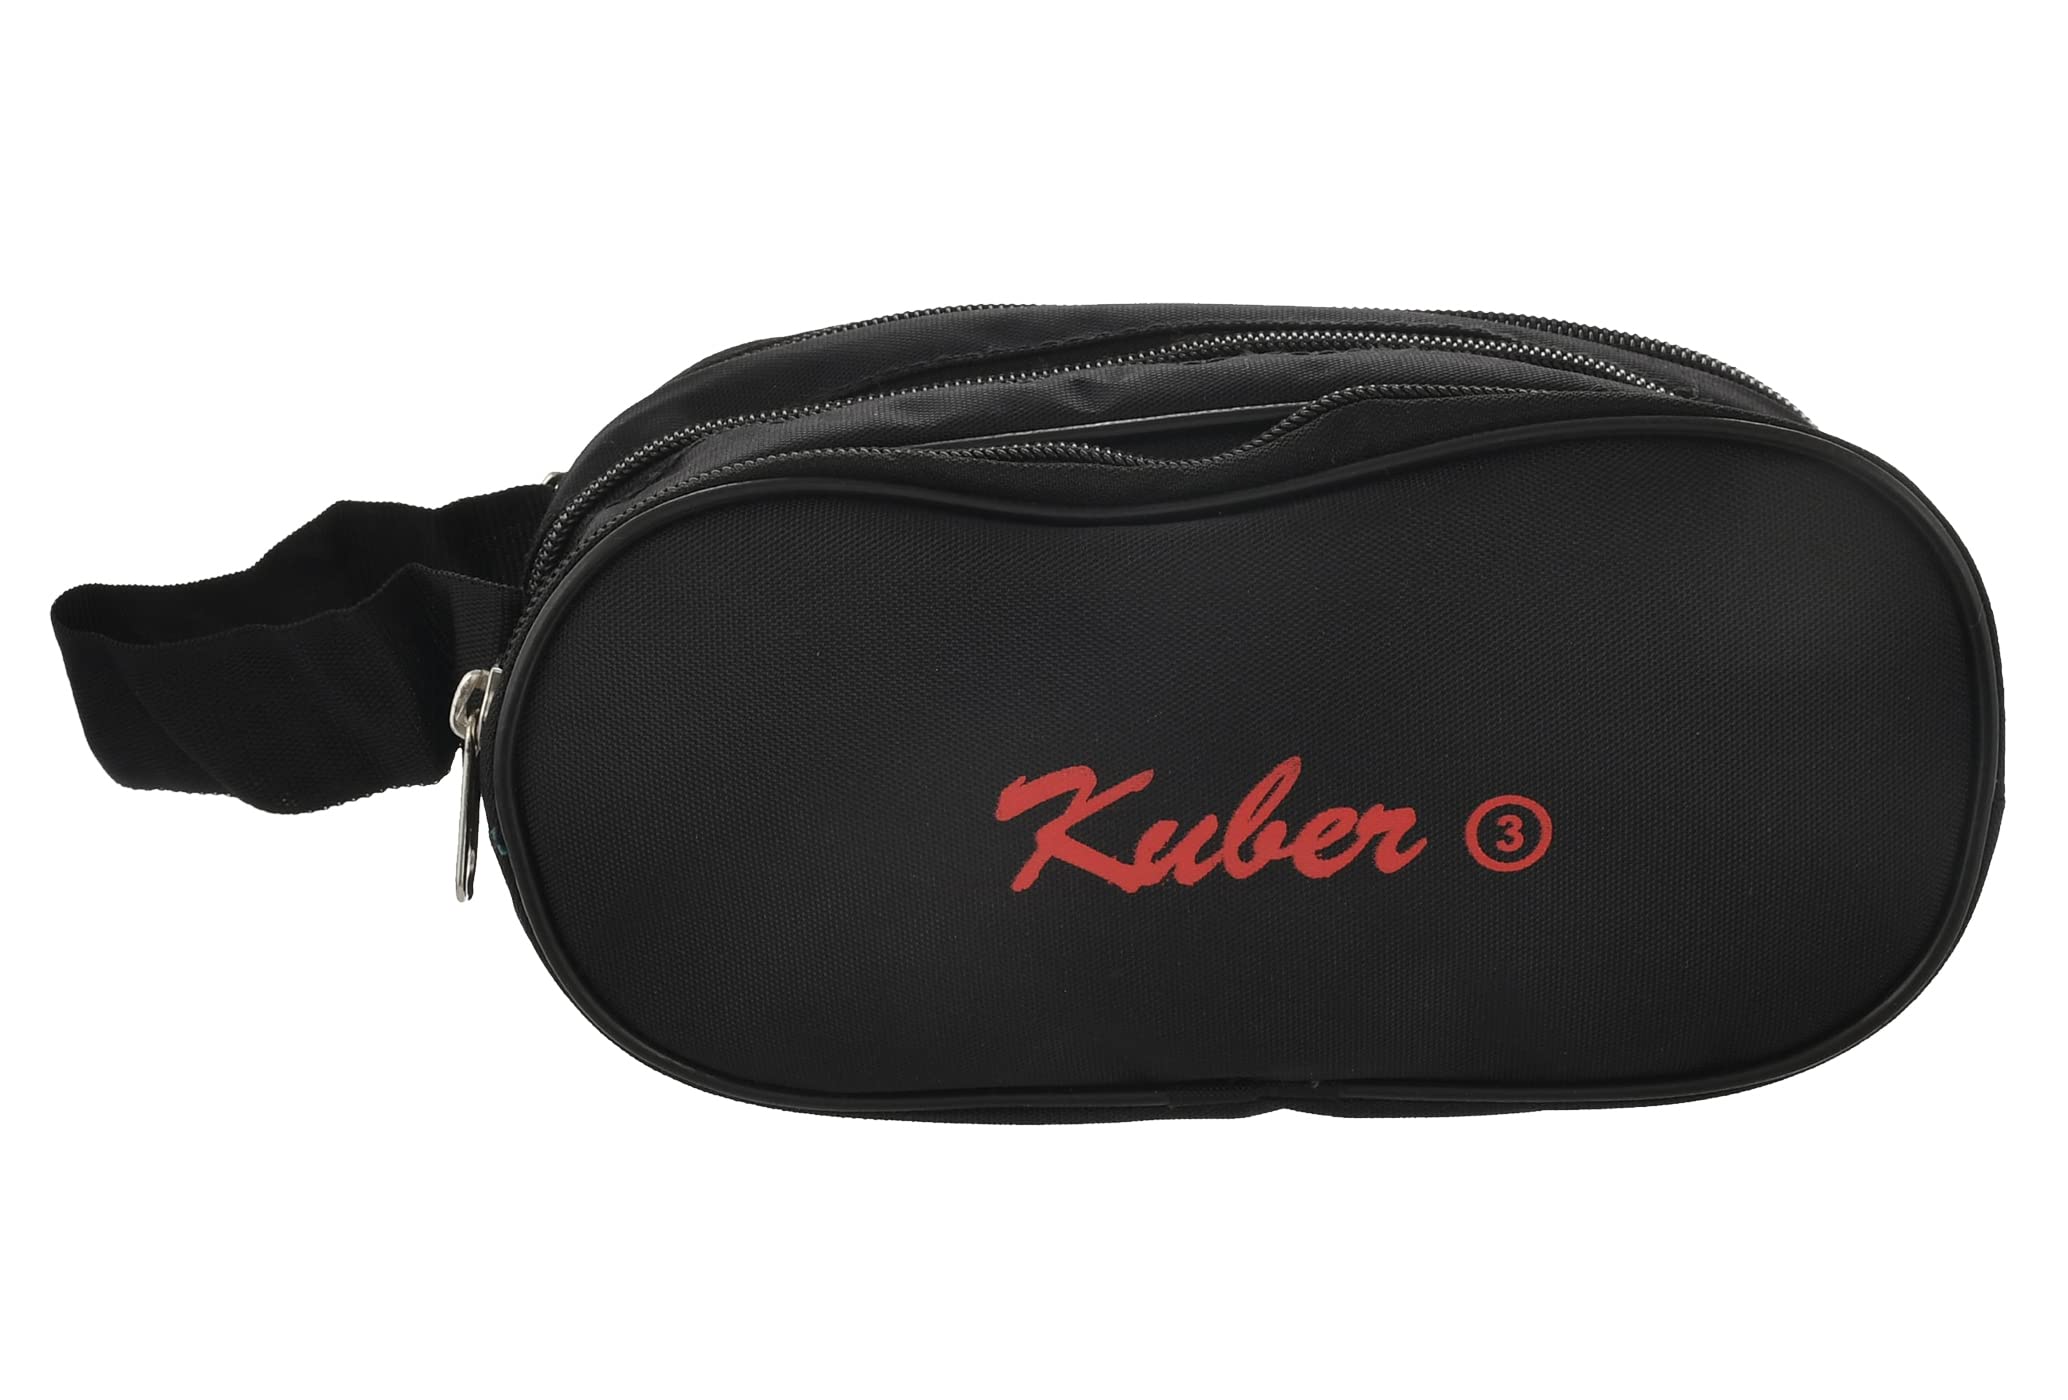 Kuber Industries Travel Toilerty bag|Shaving Kit For Men|Cosmetic Bag For Travel Accessories|3 Zipper Comparments & Carrying Strip (Black)